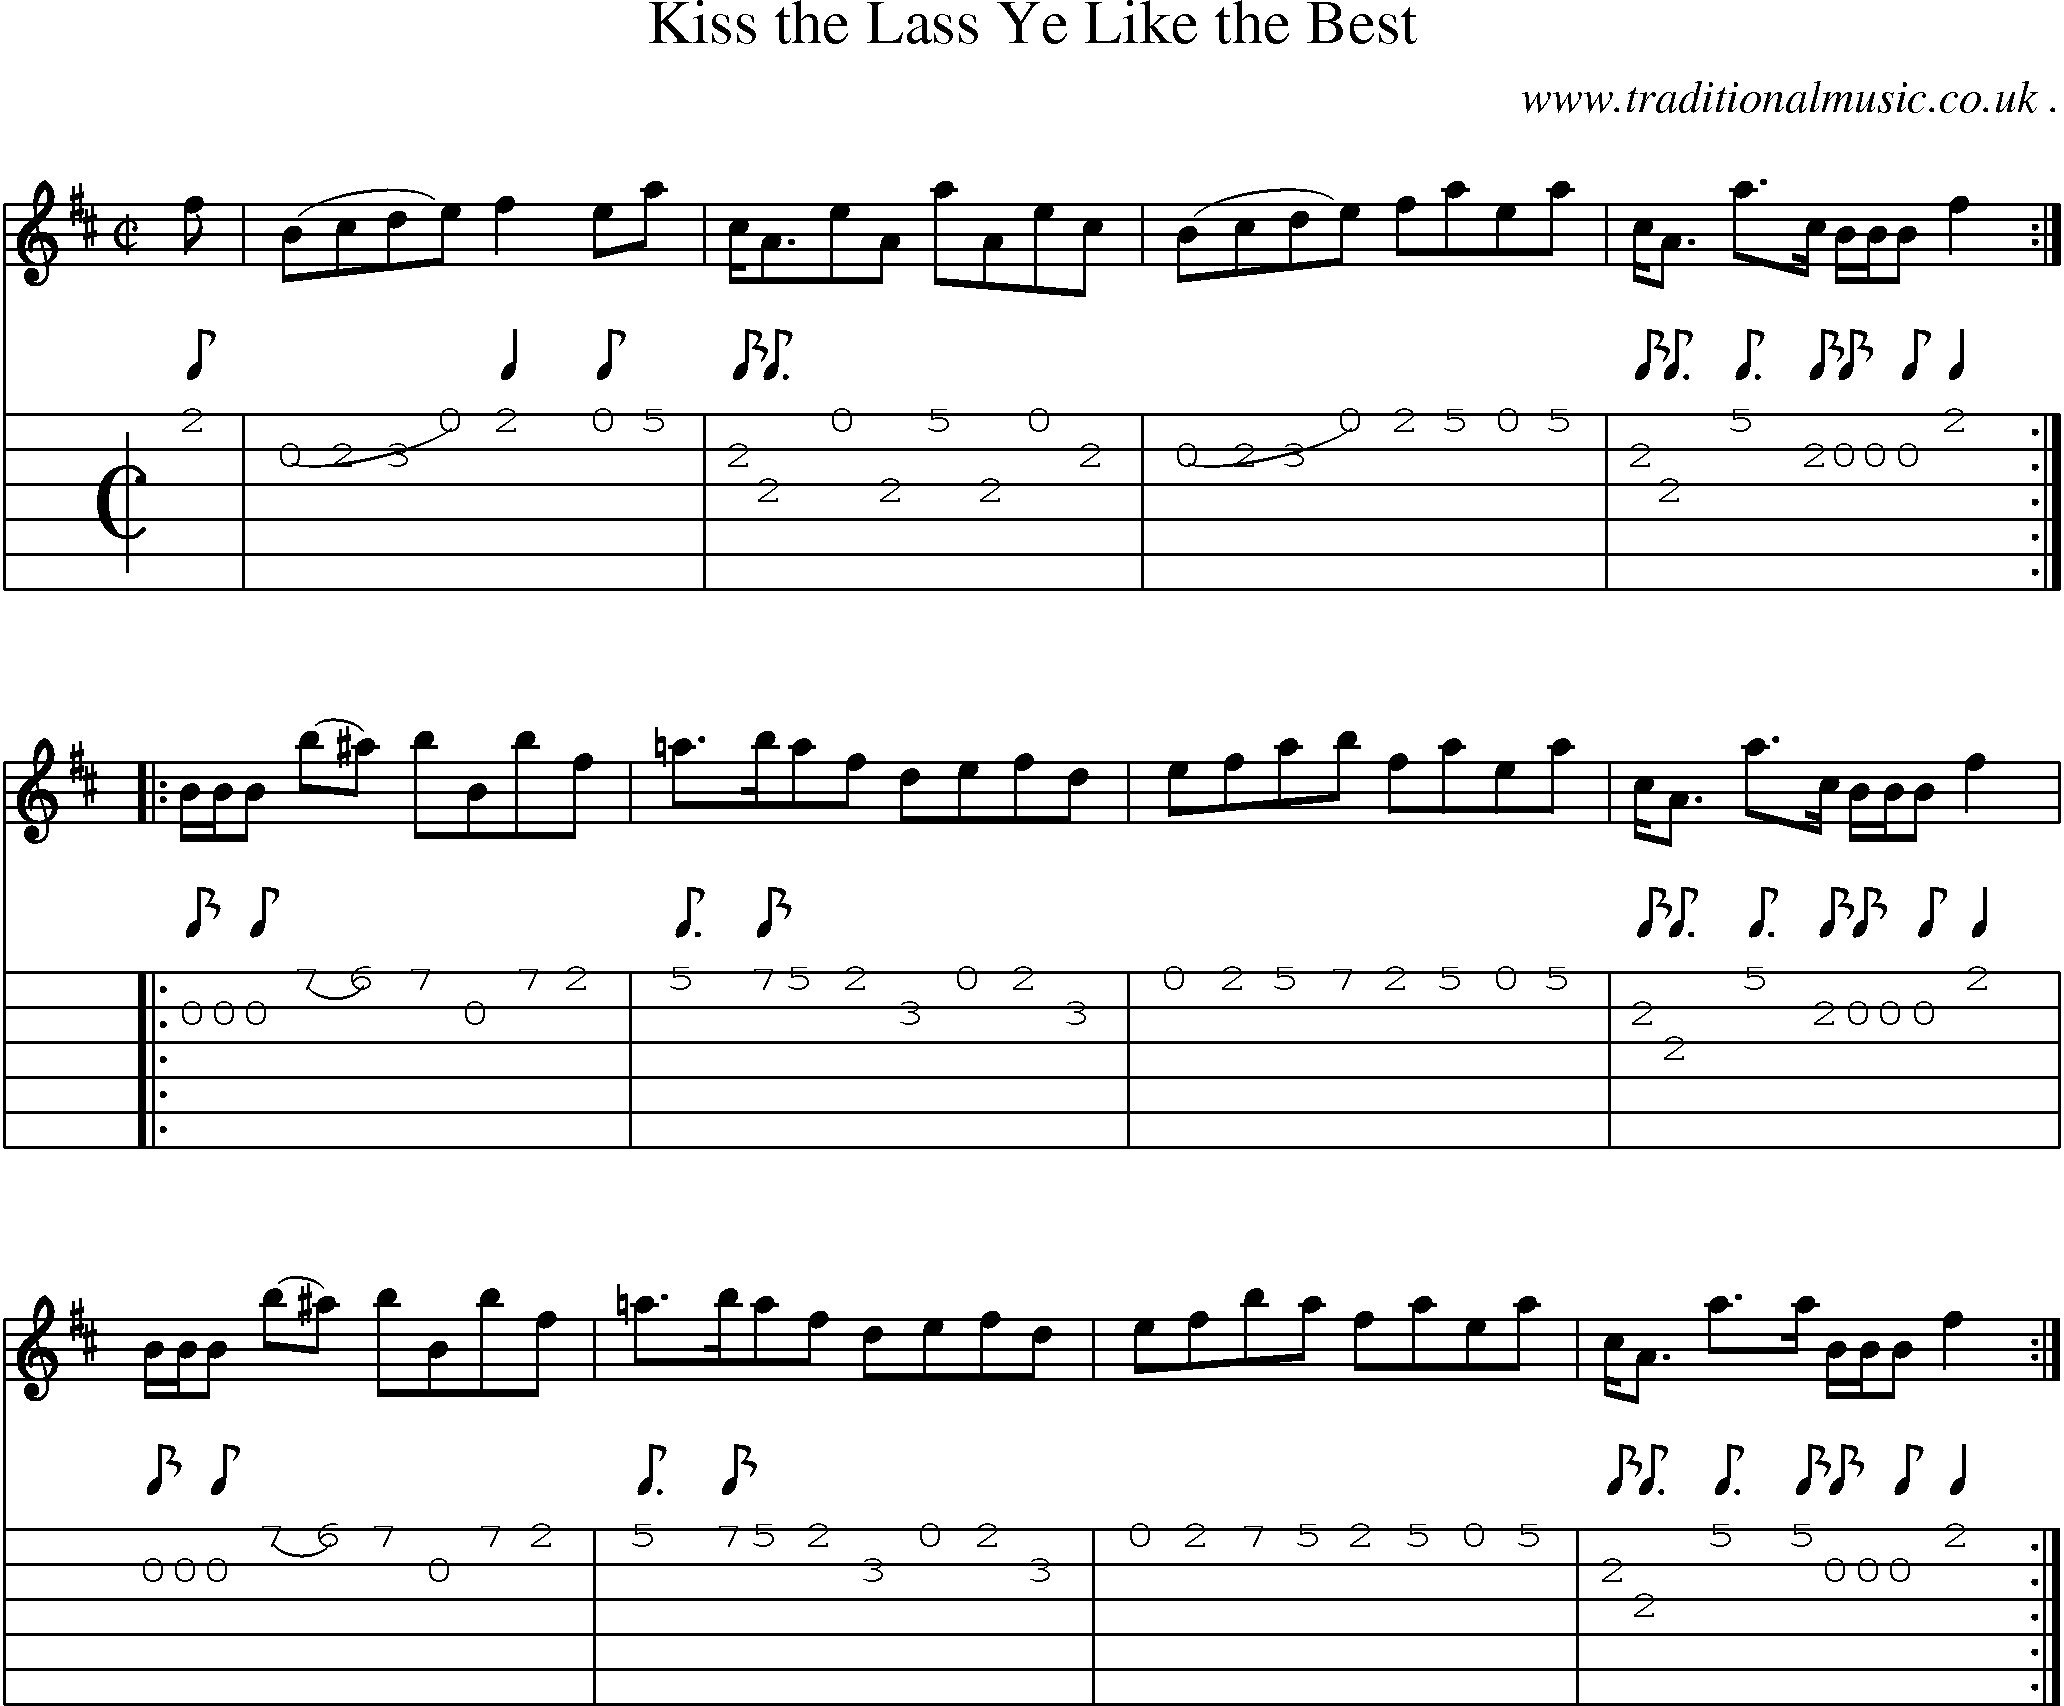 Sheet-music  score, Chords and Guitar Tabs for Kiss The Lass Ye Like The Best